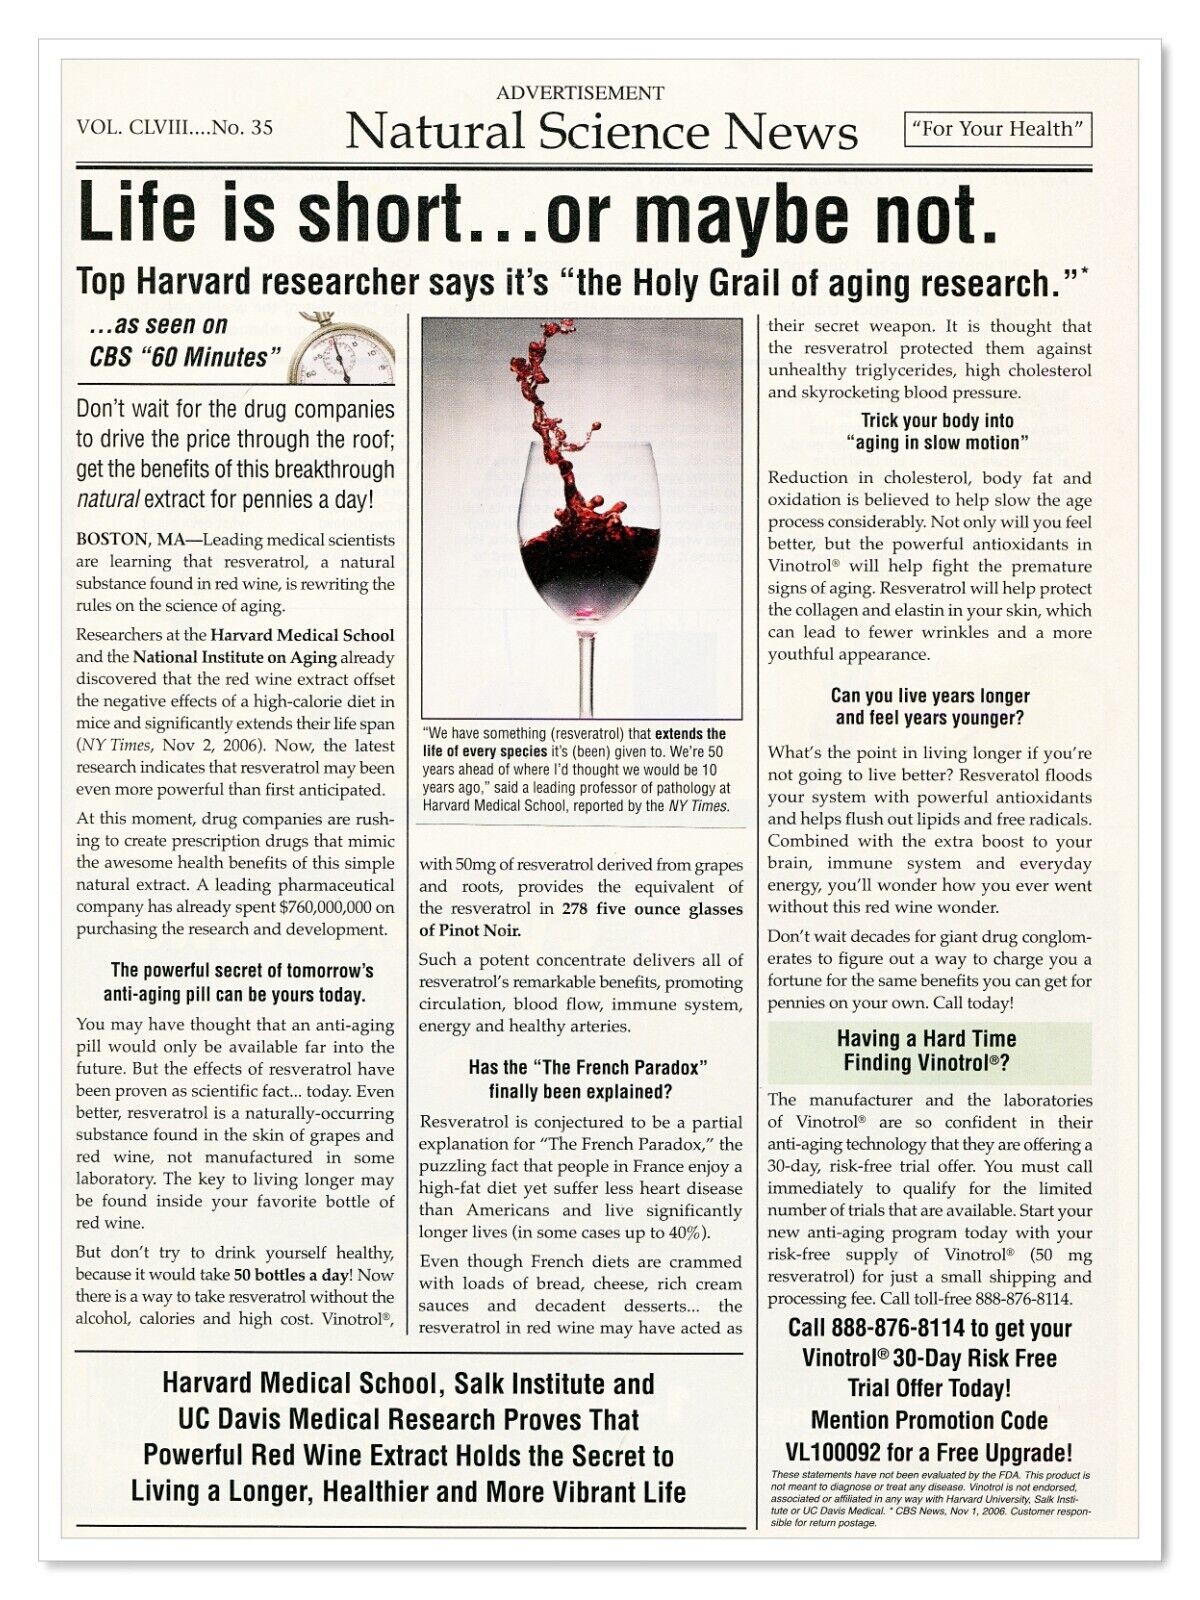 Vinotrol Anti-Aging Pill Natural Science News 2010 Full-Page Print Magazine Ad